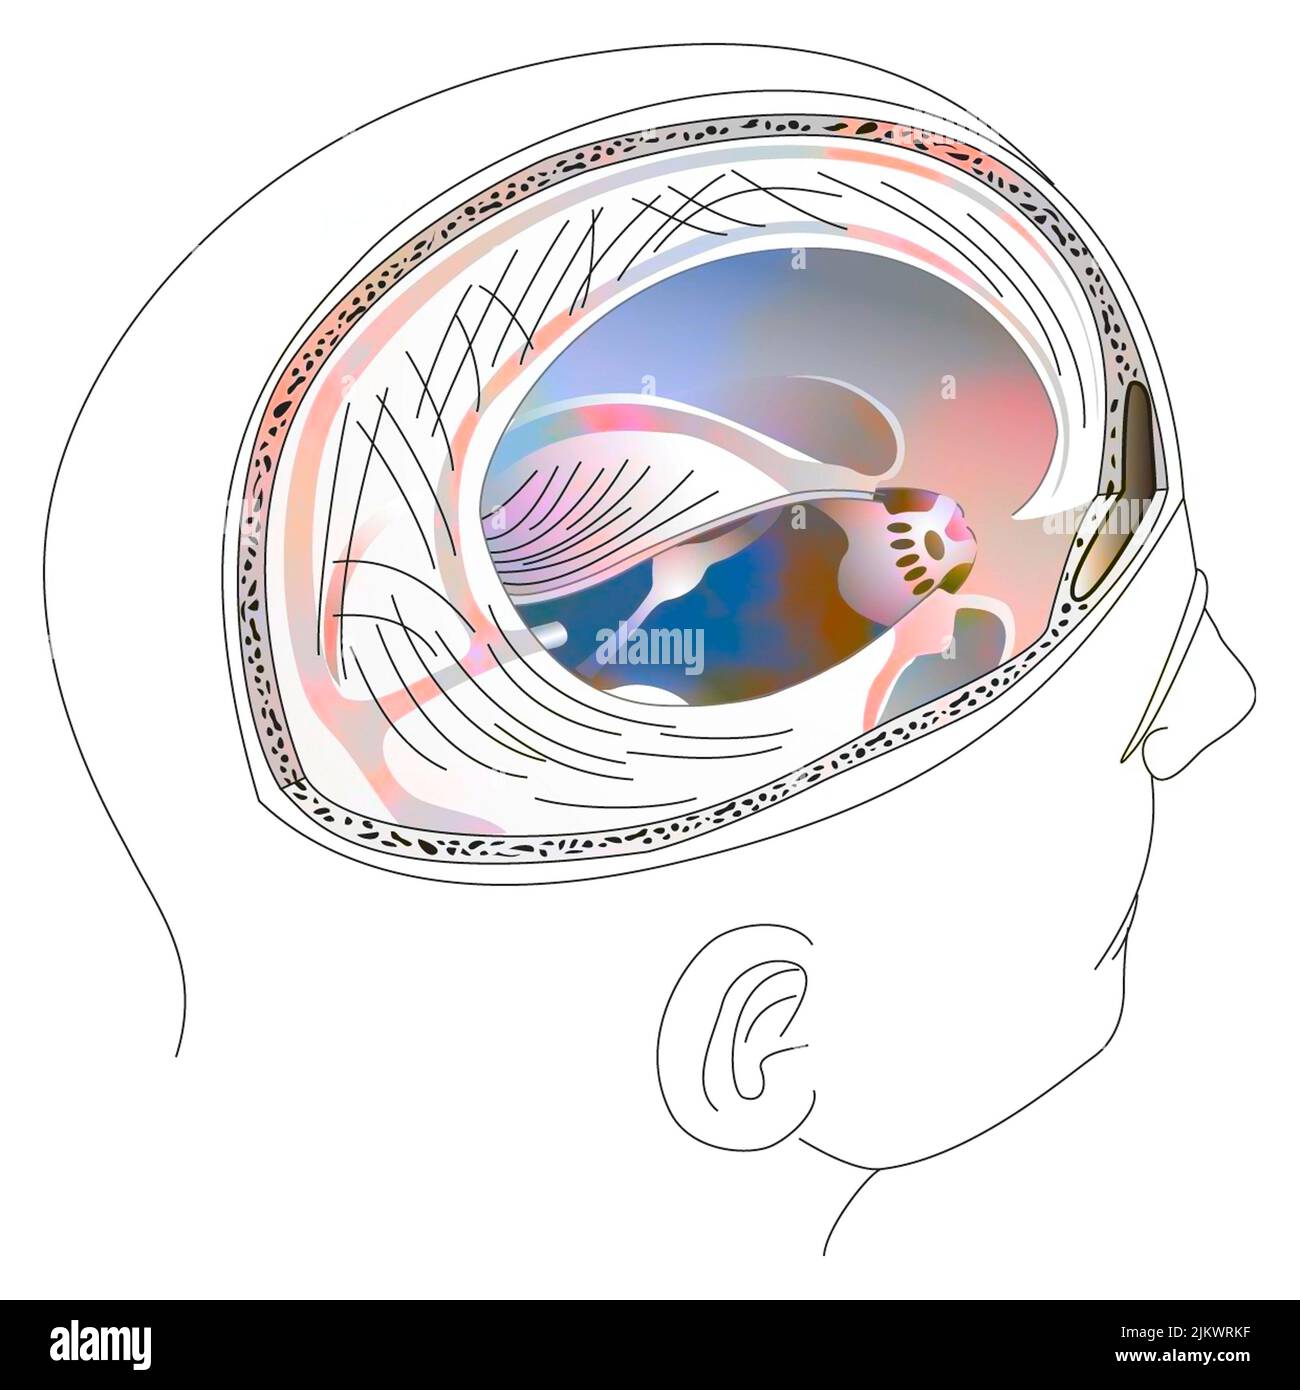 Meningeal membranes that envelop both brains and the cerebellum. Stock Photo